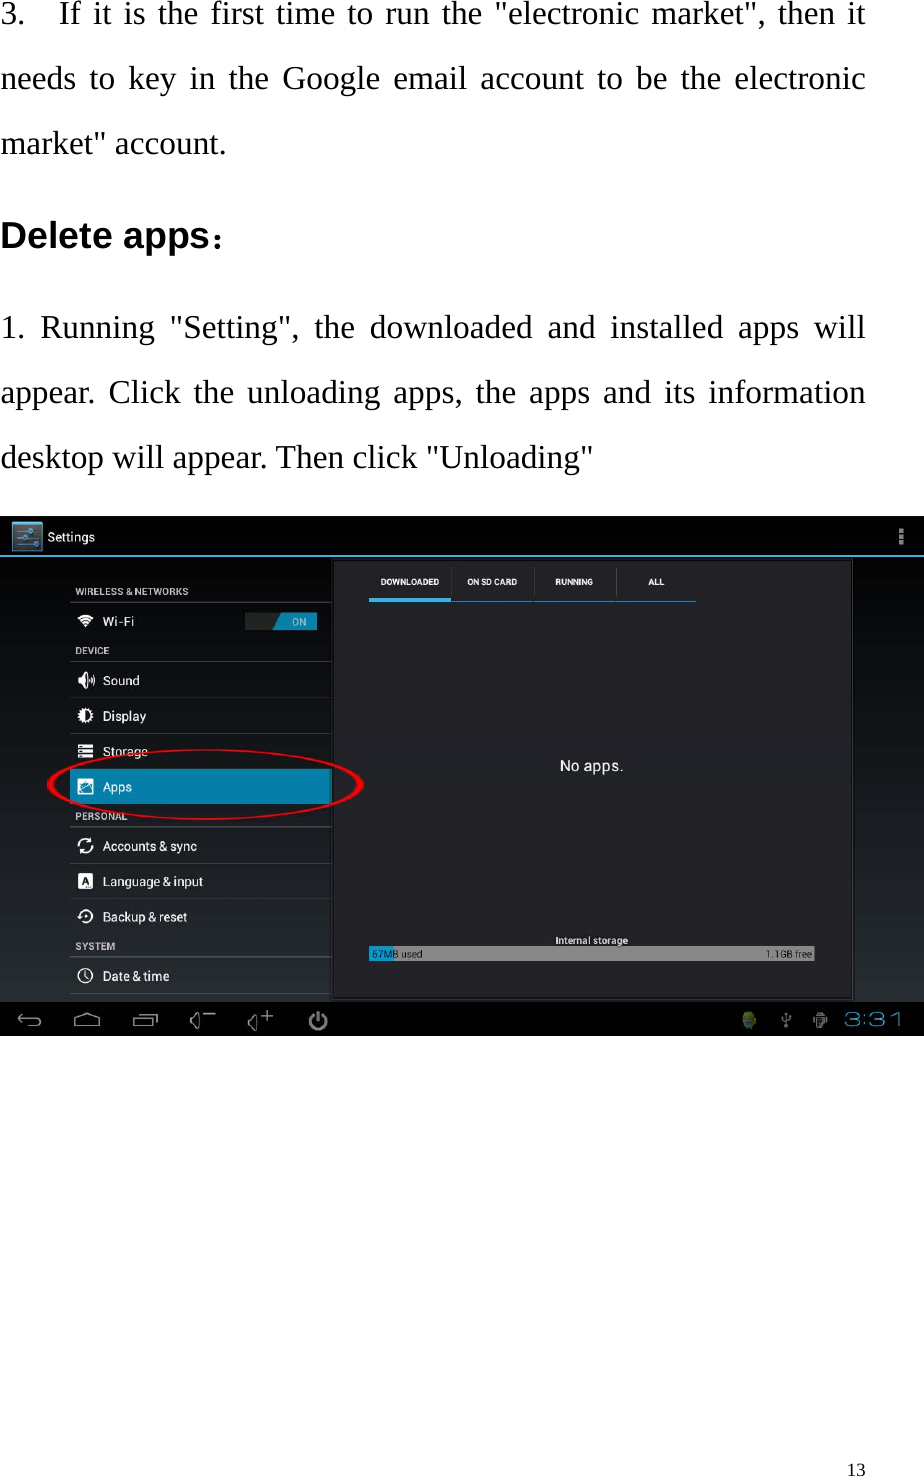    133.  If it is the first time to run the &quot;electronic market&quot;, then it needs to key in the Google email account to be the electronic market&quot; account.   Delete apps：  1. Running &quot;Setting&quot;, the downloaded and installed apps will appear. Click the unloading apps, the apps and its information desktop will appear. Then click &quot;Unloading&quot;  